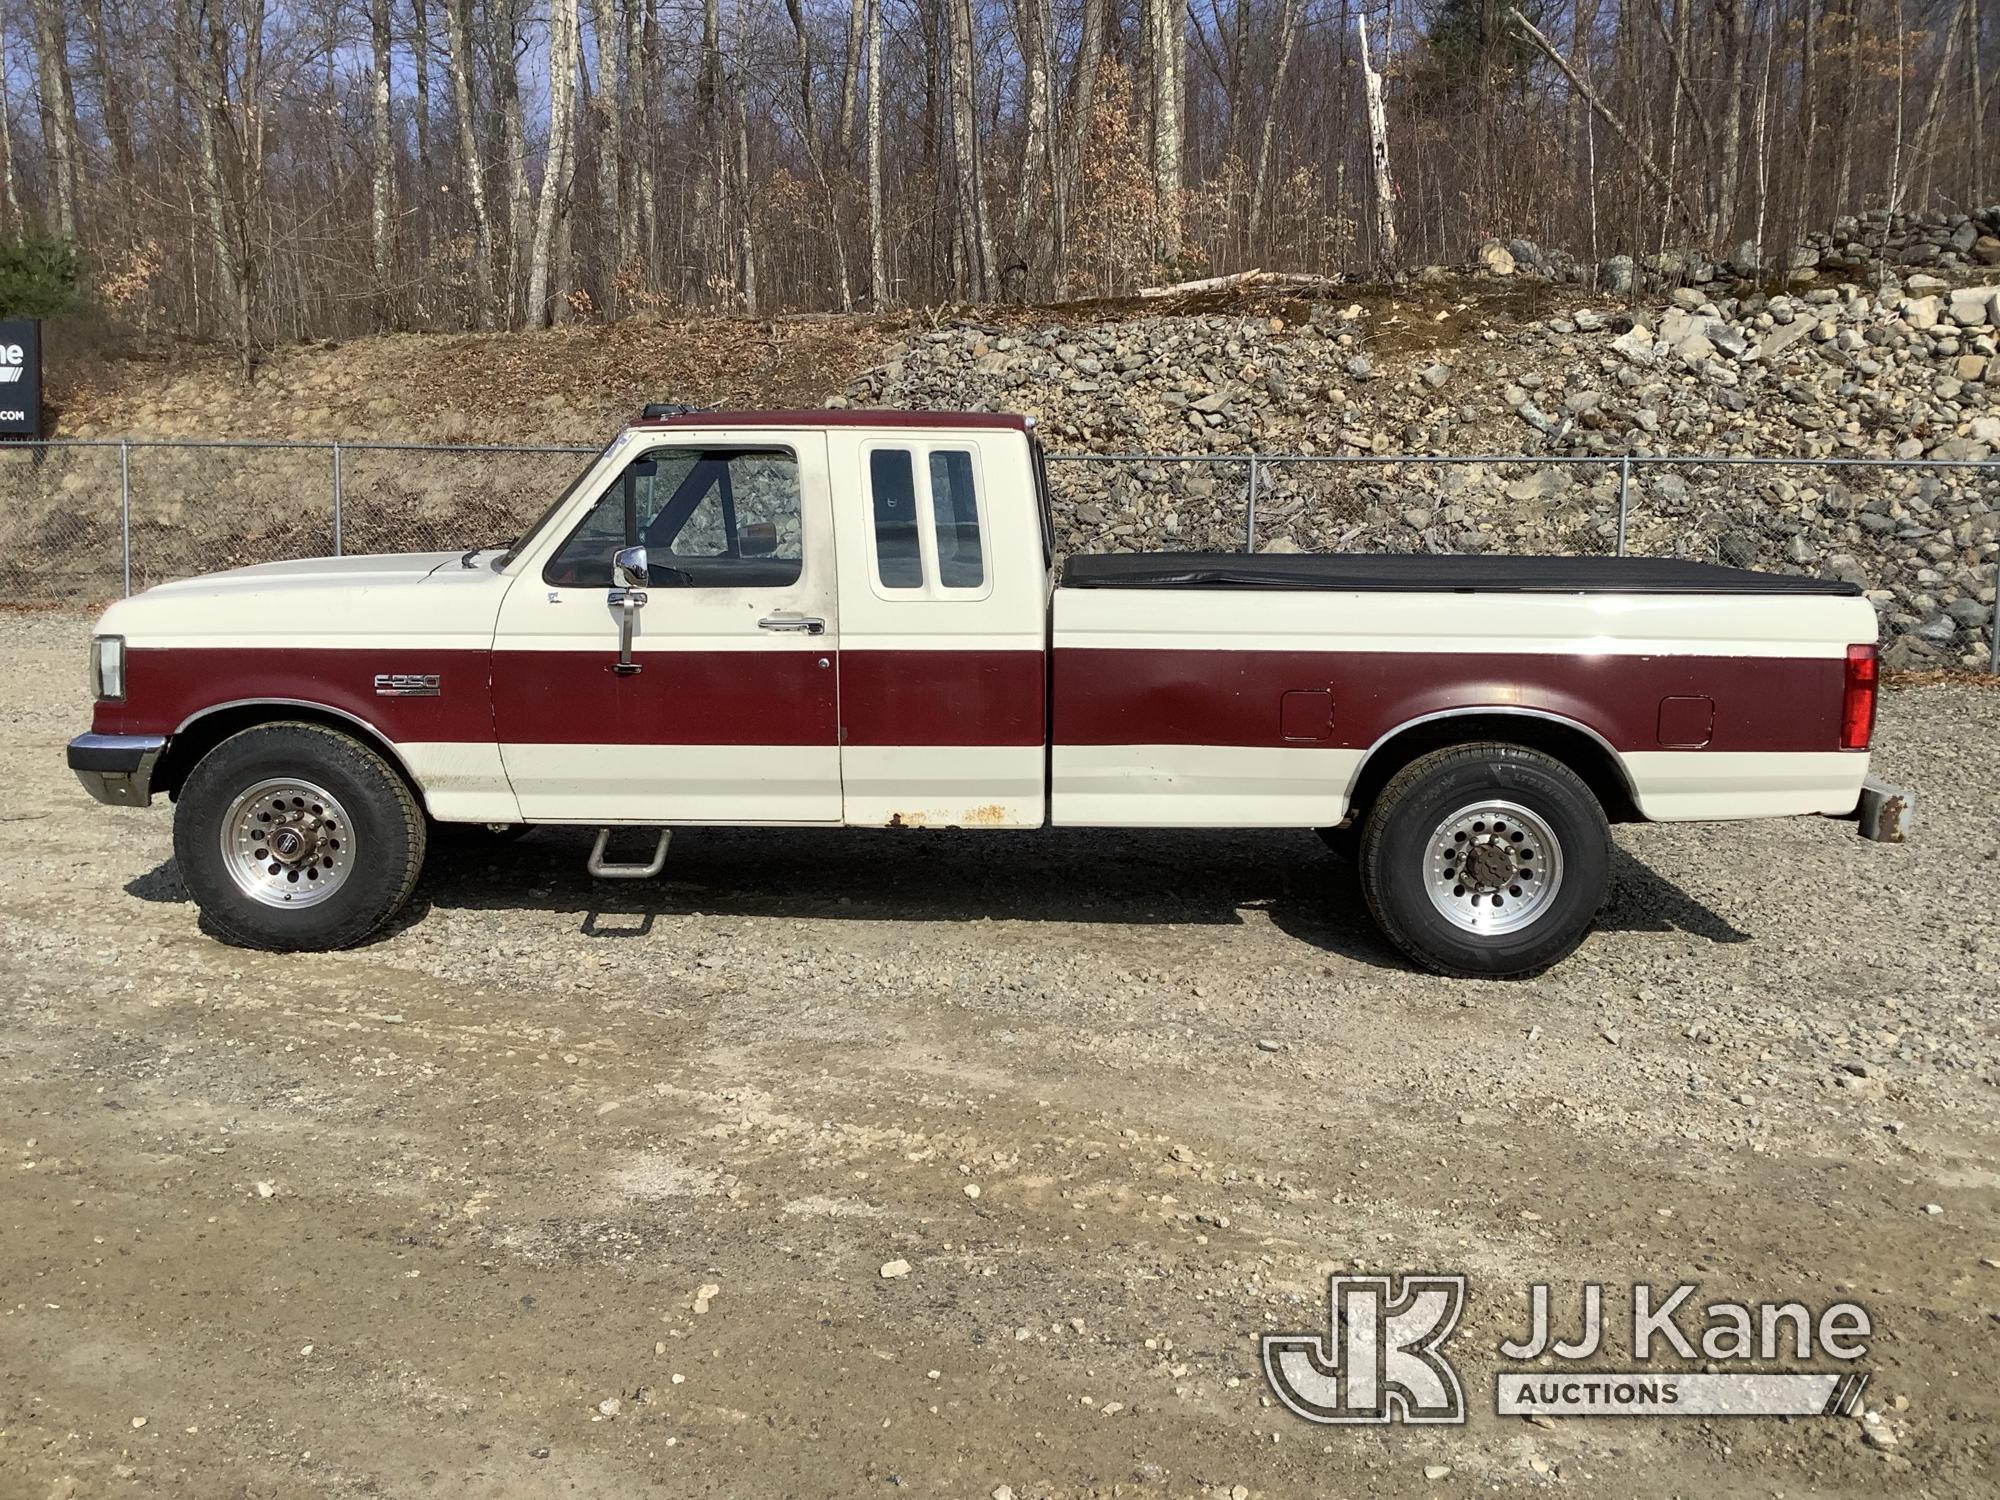 (Shrewsbury, MA) 1988 Ford F250 Extended-Cab Pickup Truck Runs & Moves) (Body & Rust Damage, Parts I